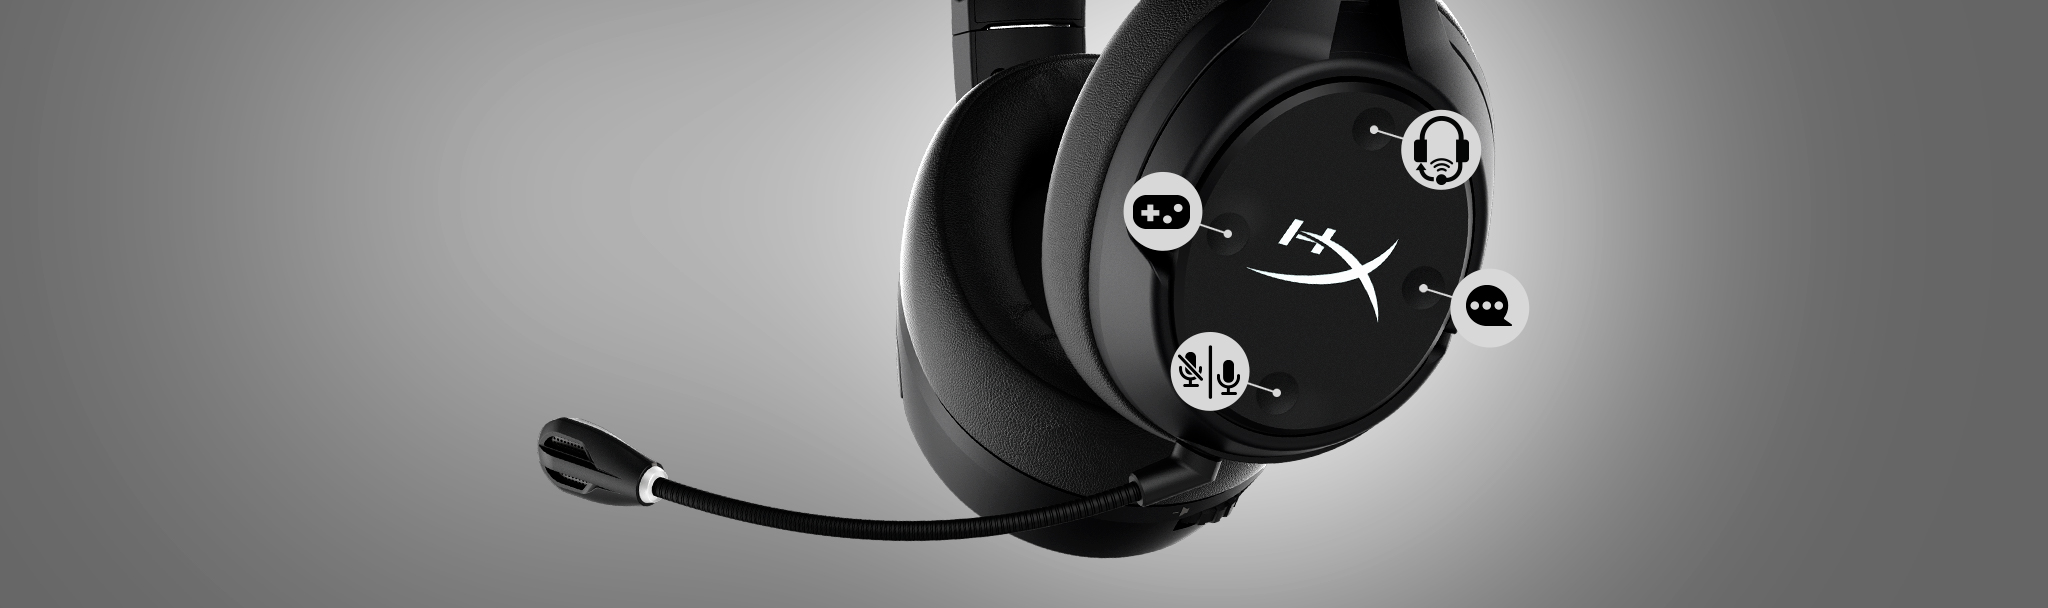 HyperX Cloud Flight S Headset is Now Available